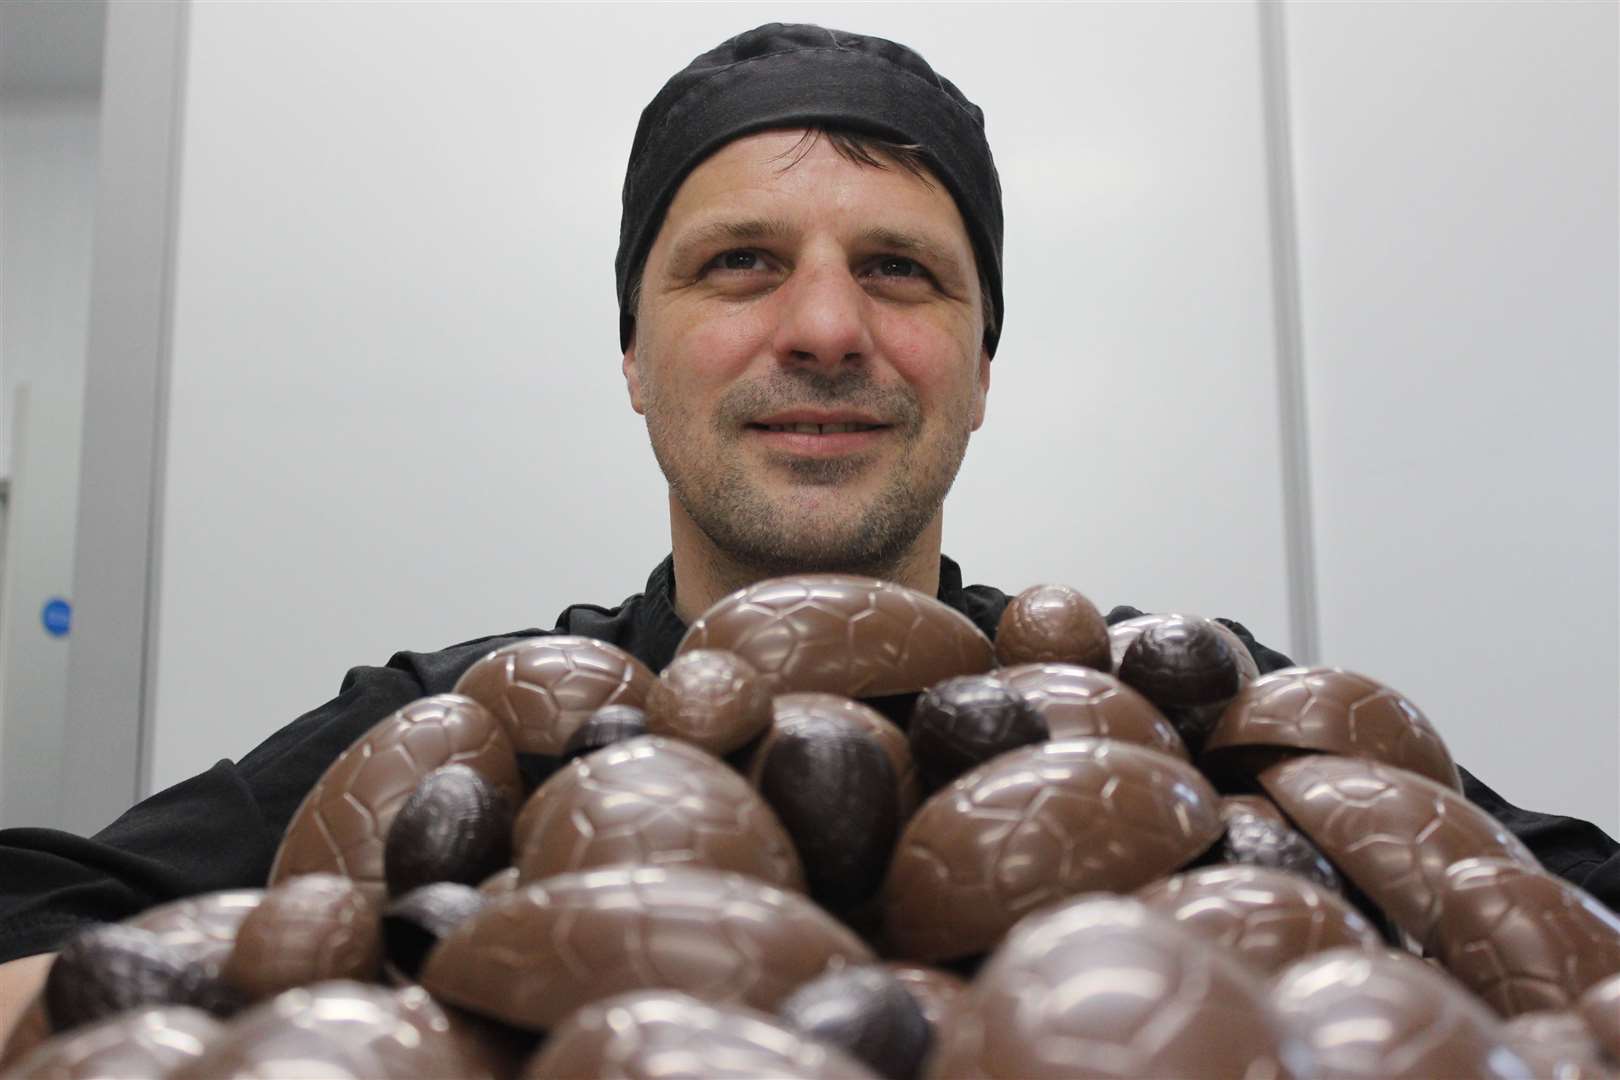 James Findlay with some Cocoa Mountain chocolate eggs.